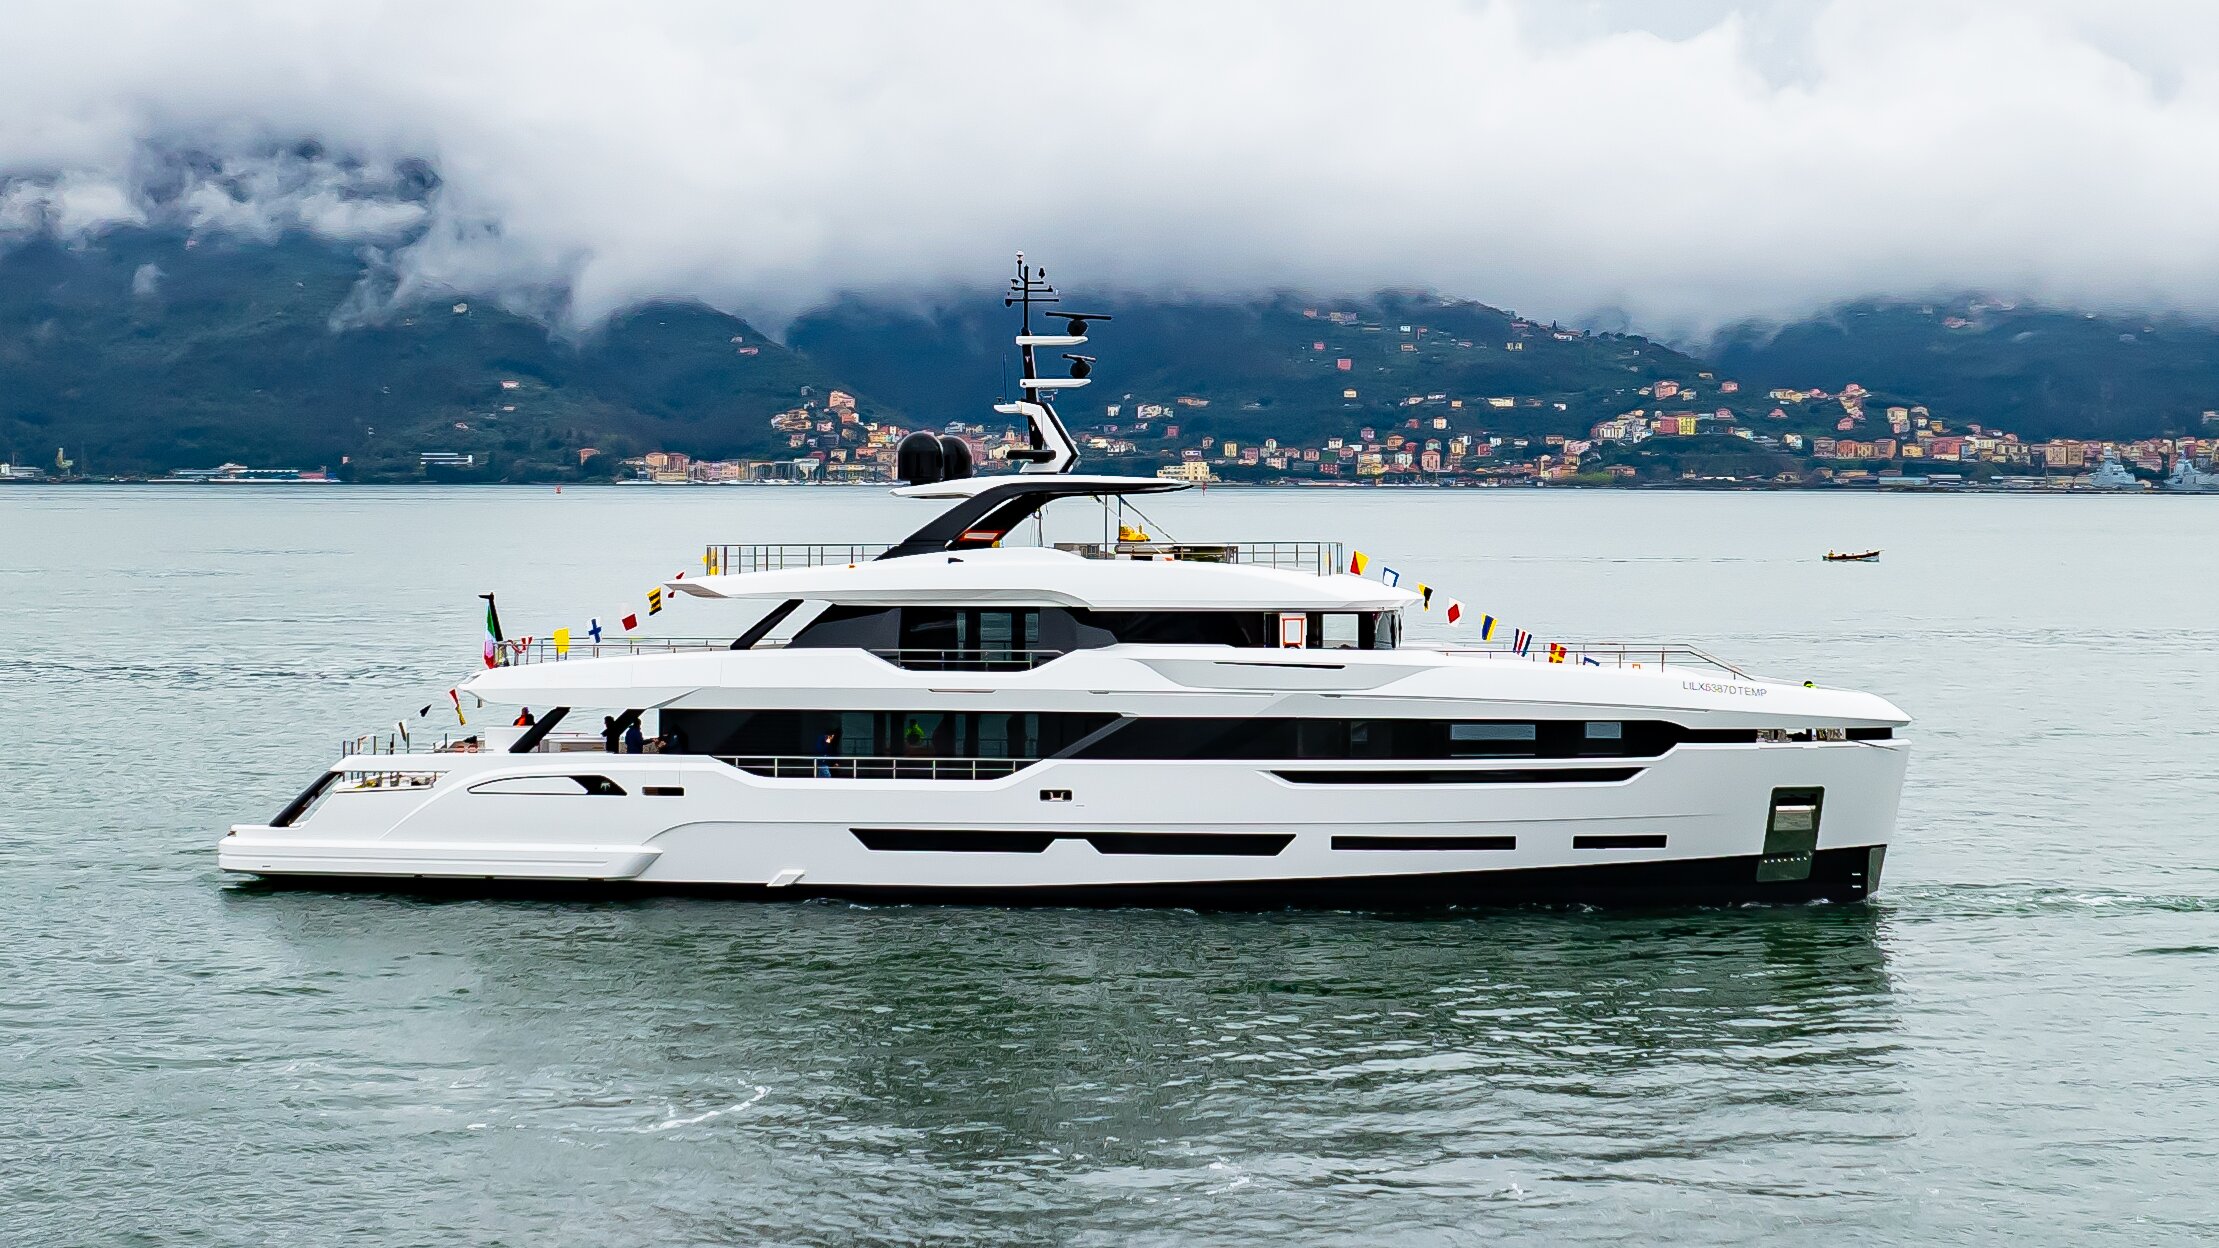 BAGLIETTO: Five motor yachts between 41M and 52M in length